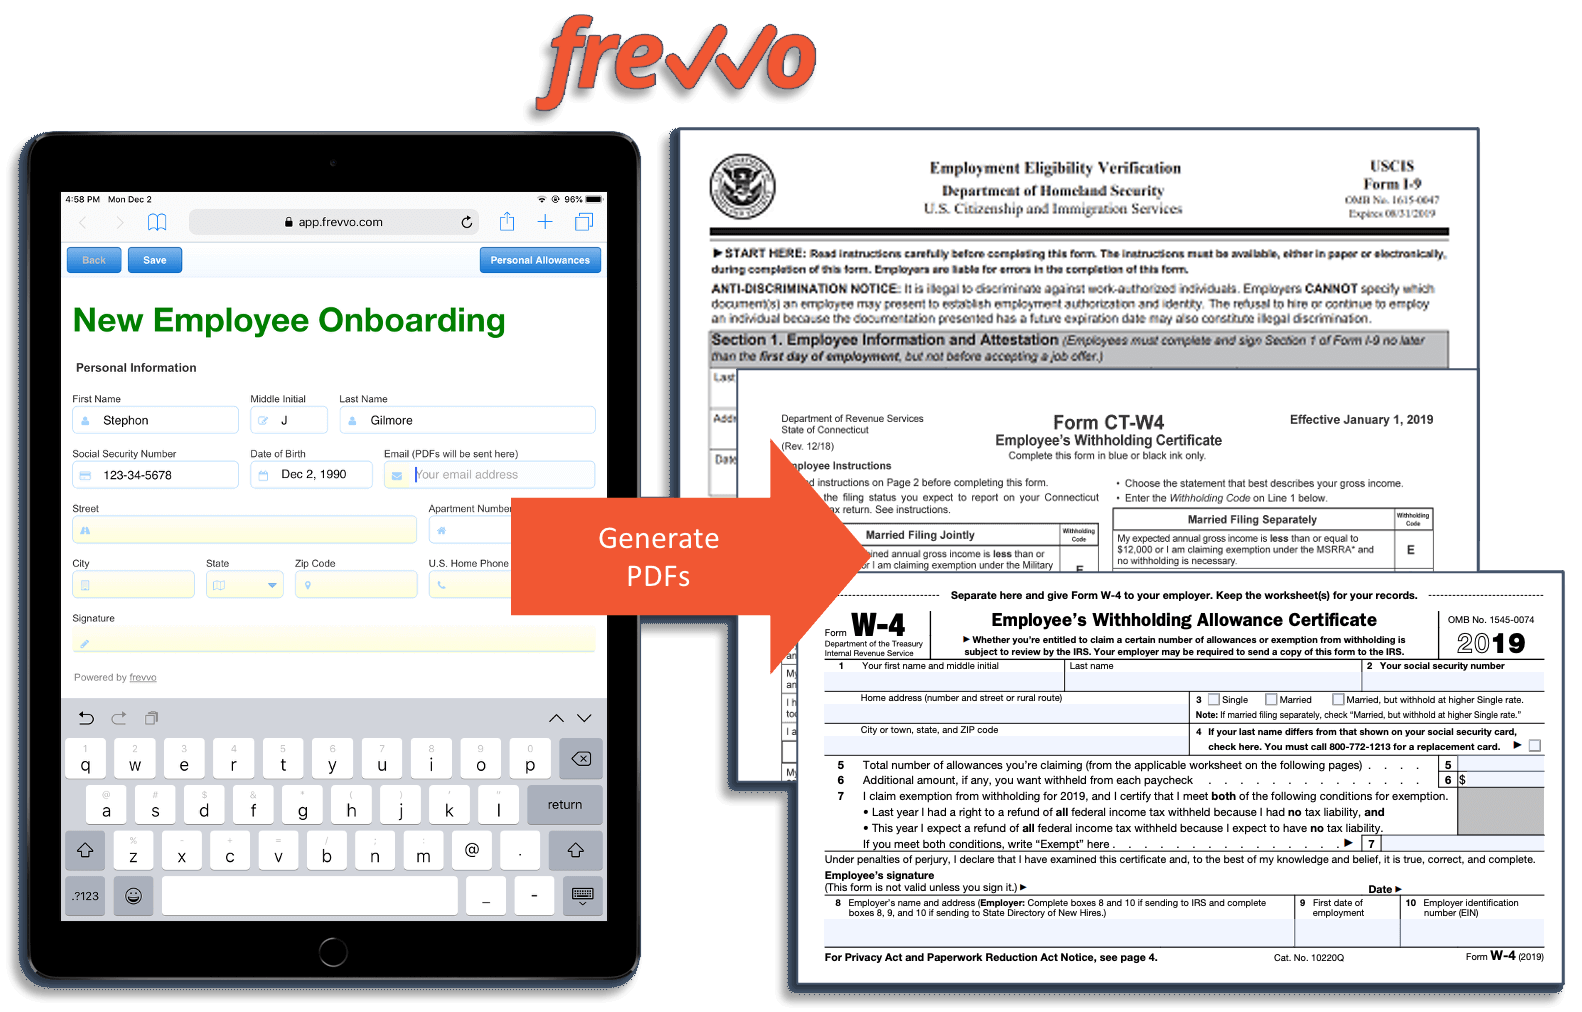 PDF generation feature in frevvo